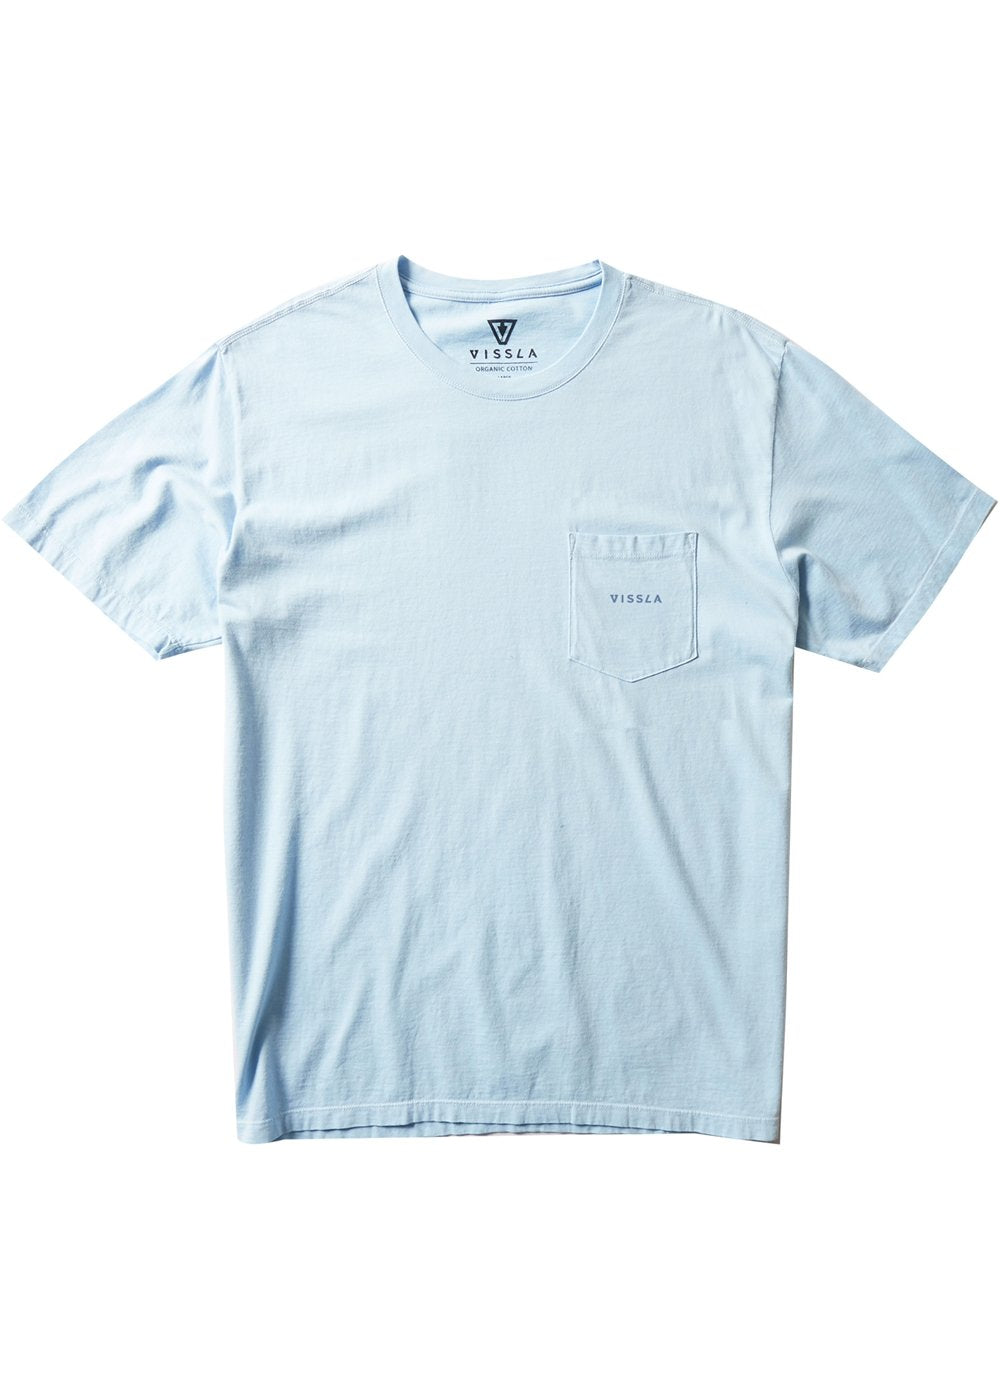 Vissla Men's ice blue short sleeve t-shirt with the word "Vissla" on the chest pocket in fine grey print